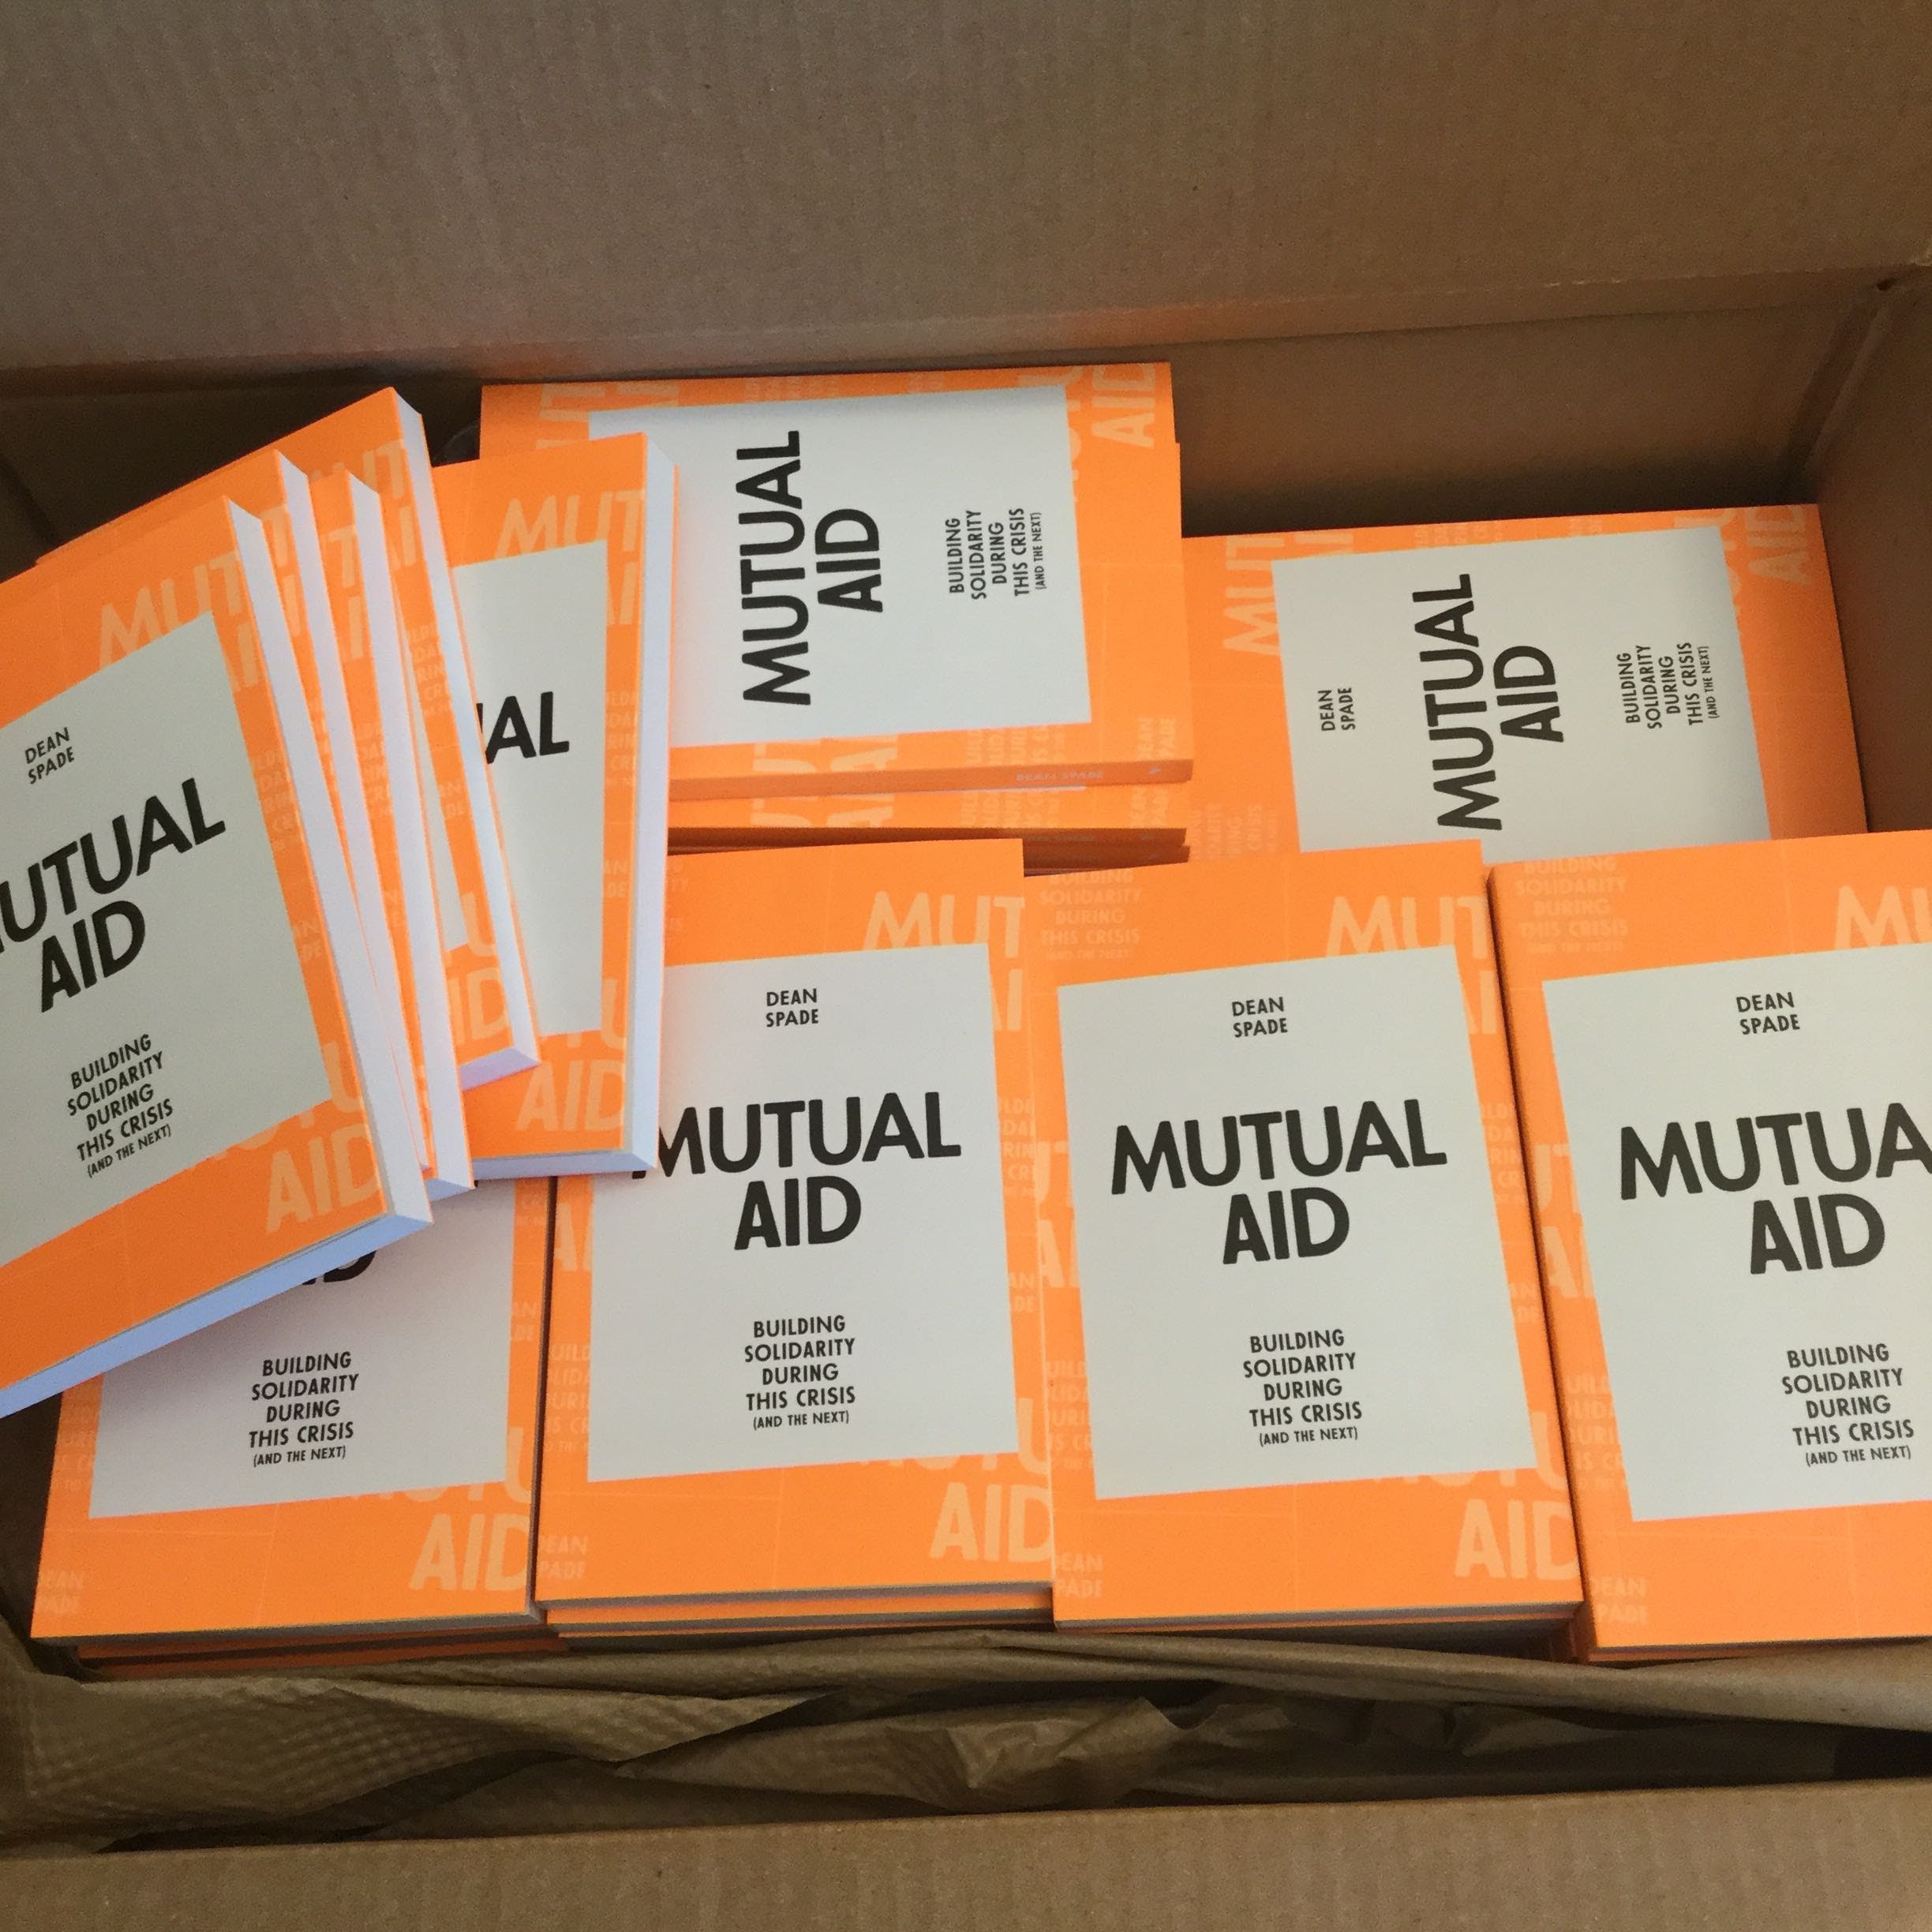 box full of copies of the book Mutual Aid